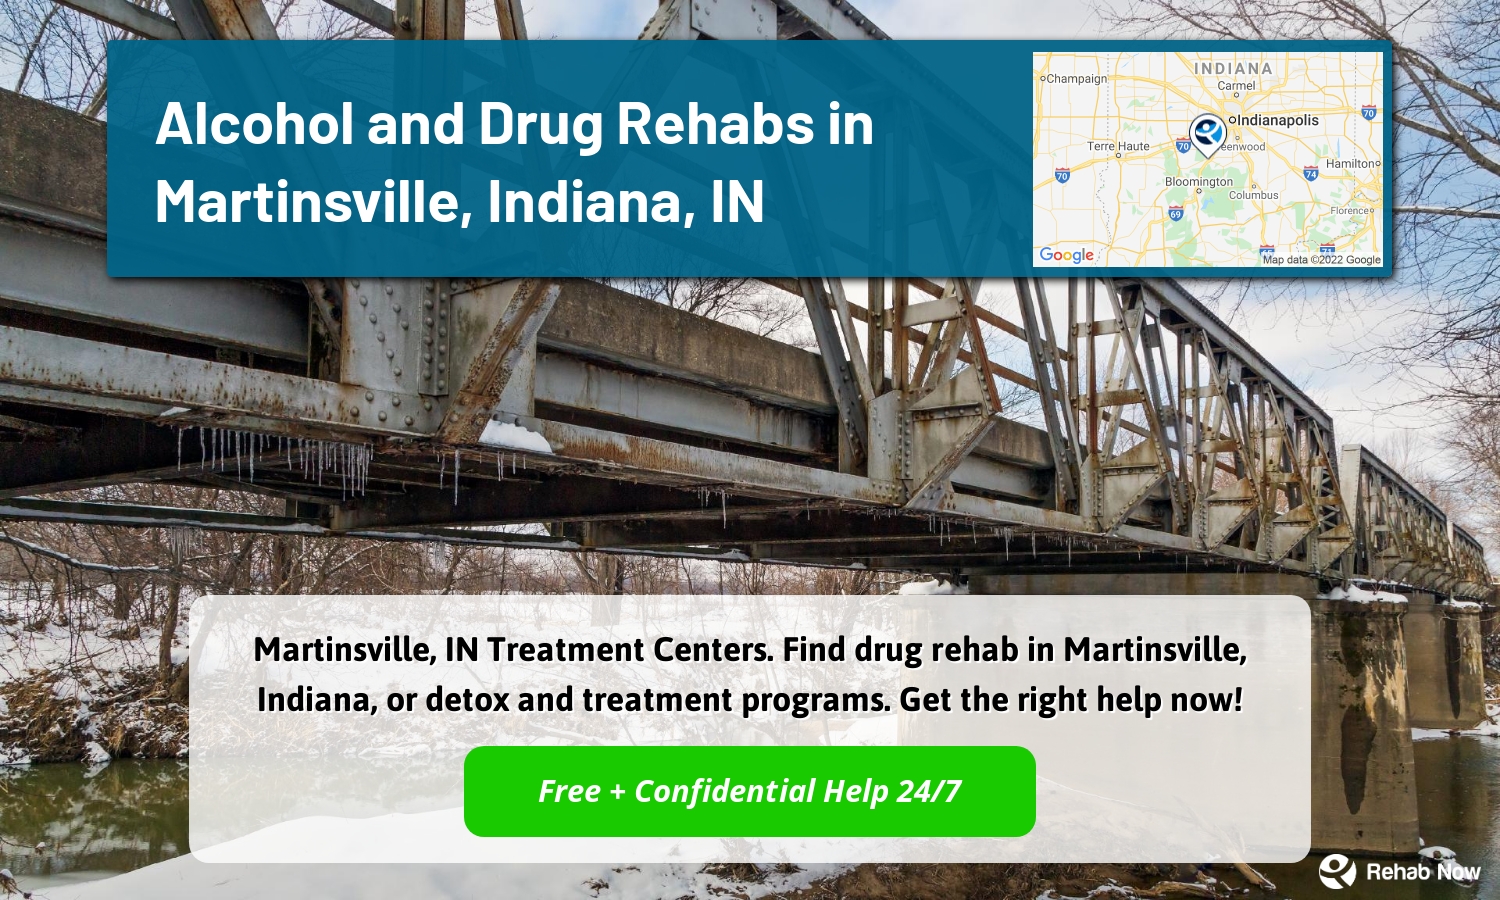 Martinsville, IN Treatment Centers. Find drug rehab in Martinsville, Indiana, or detox and treatment programs. Get the right help now!